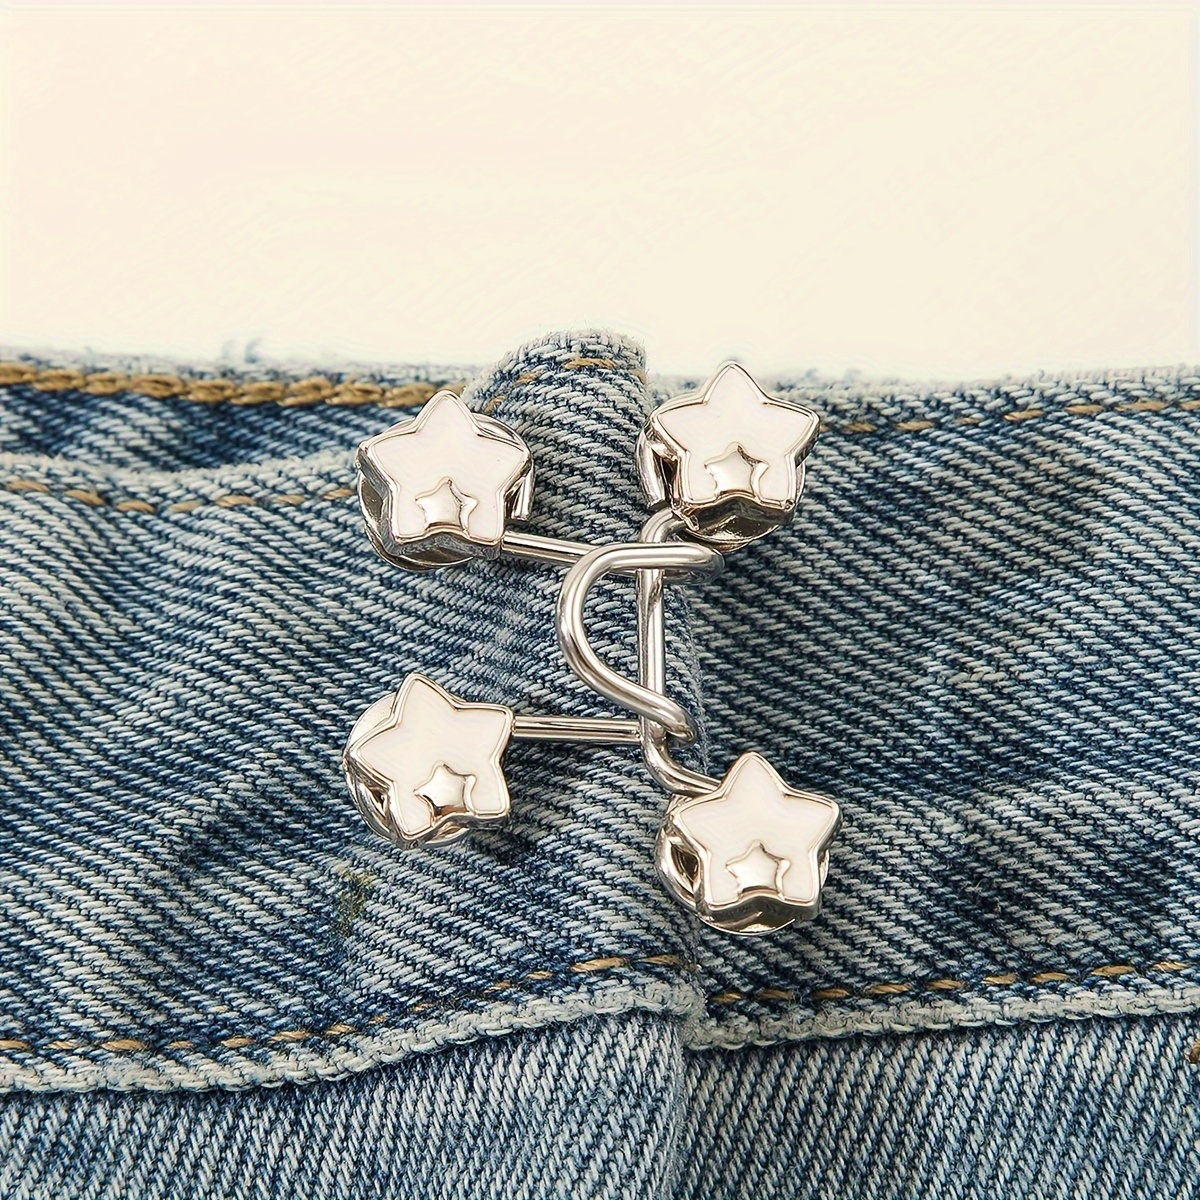  24 Pieces Jean Buttons for Loose Jeans,Pant Waist Tightener  Adjustable Waist Buckle Extender Reusable Waistband Tightener No Sewing  Button Adjuster Detachable Buttons Pins for Jeans Pants Too Big